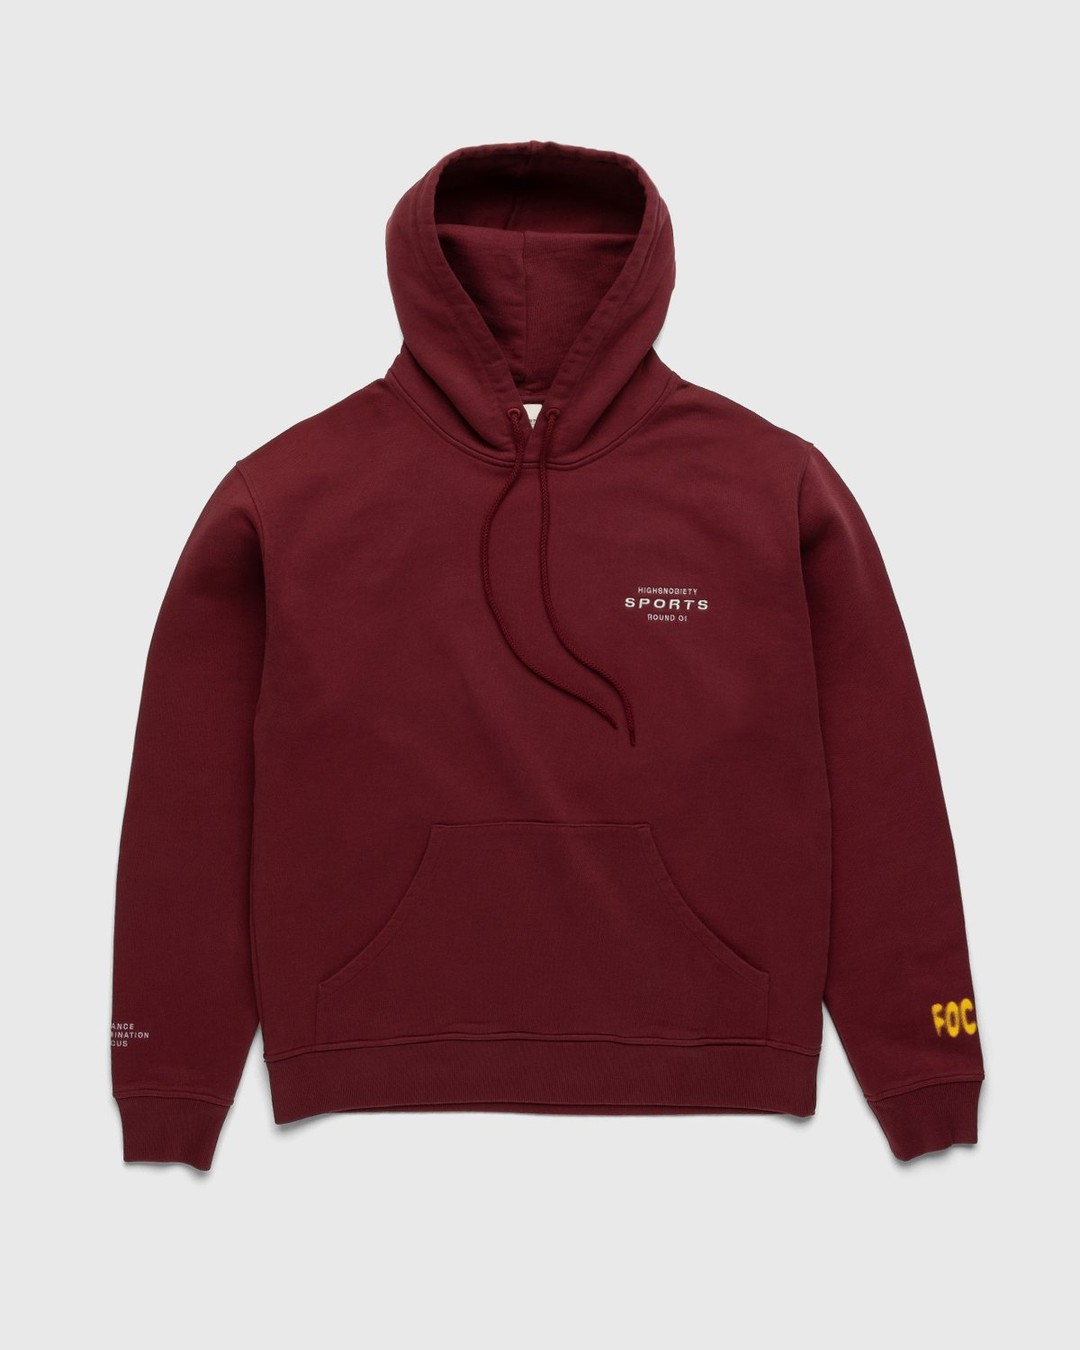 Highsnobiety – HS Sports Focus Hoodie Bordeaux - Sweats - Red - Image 2